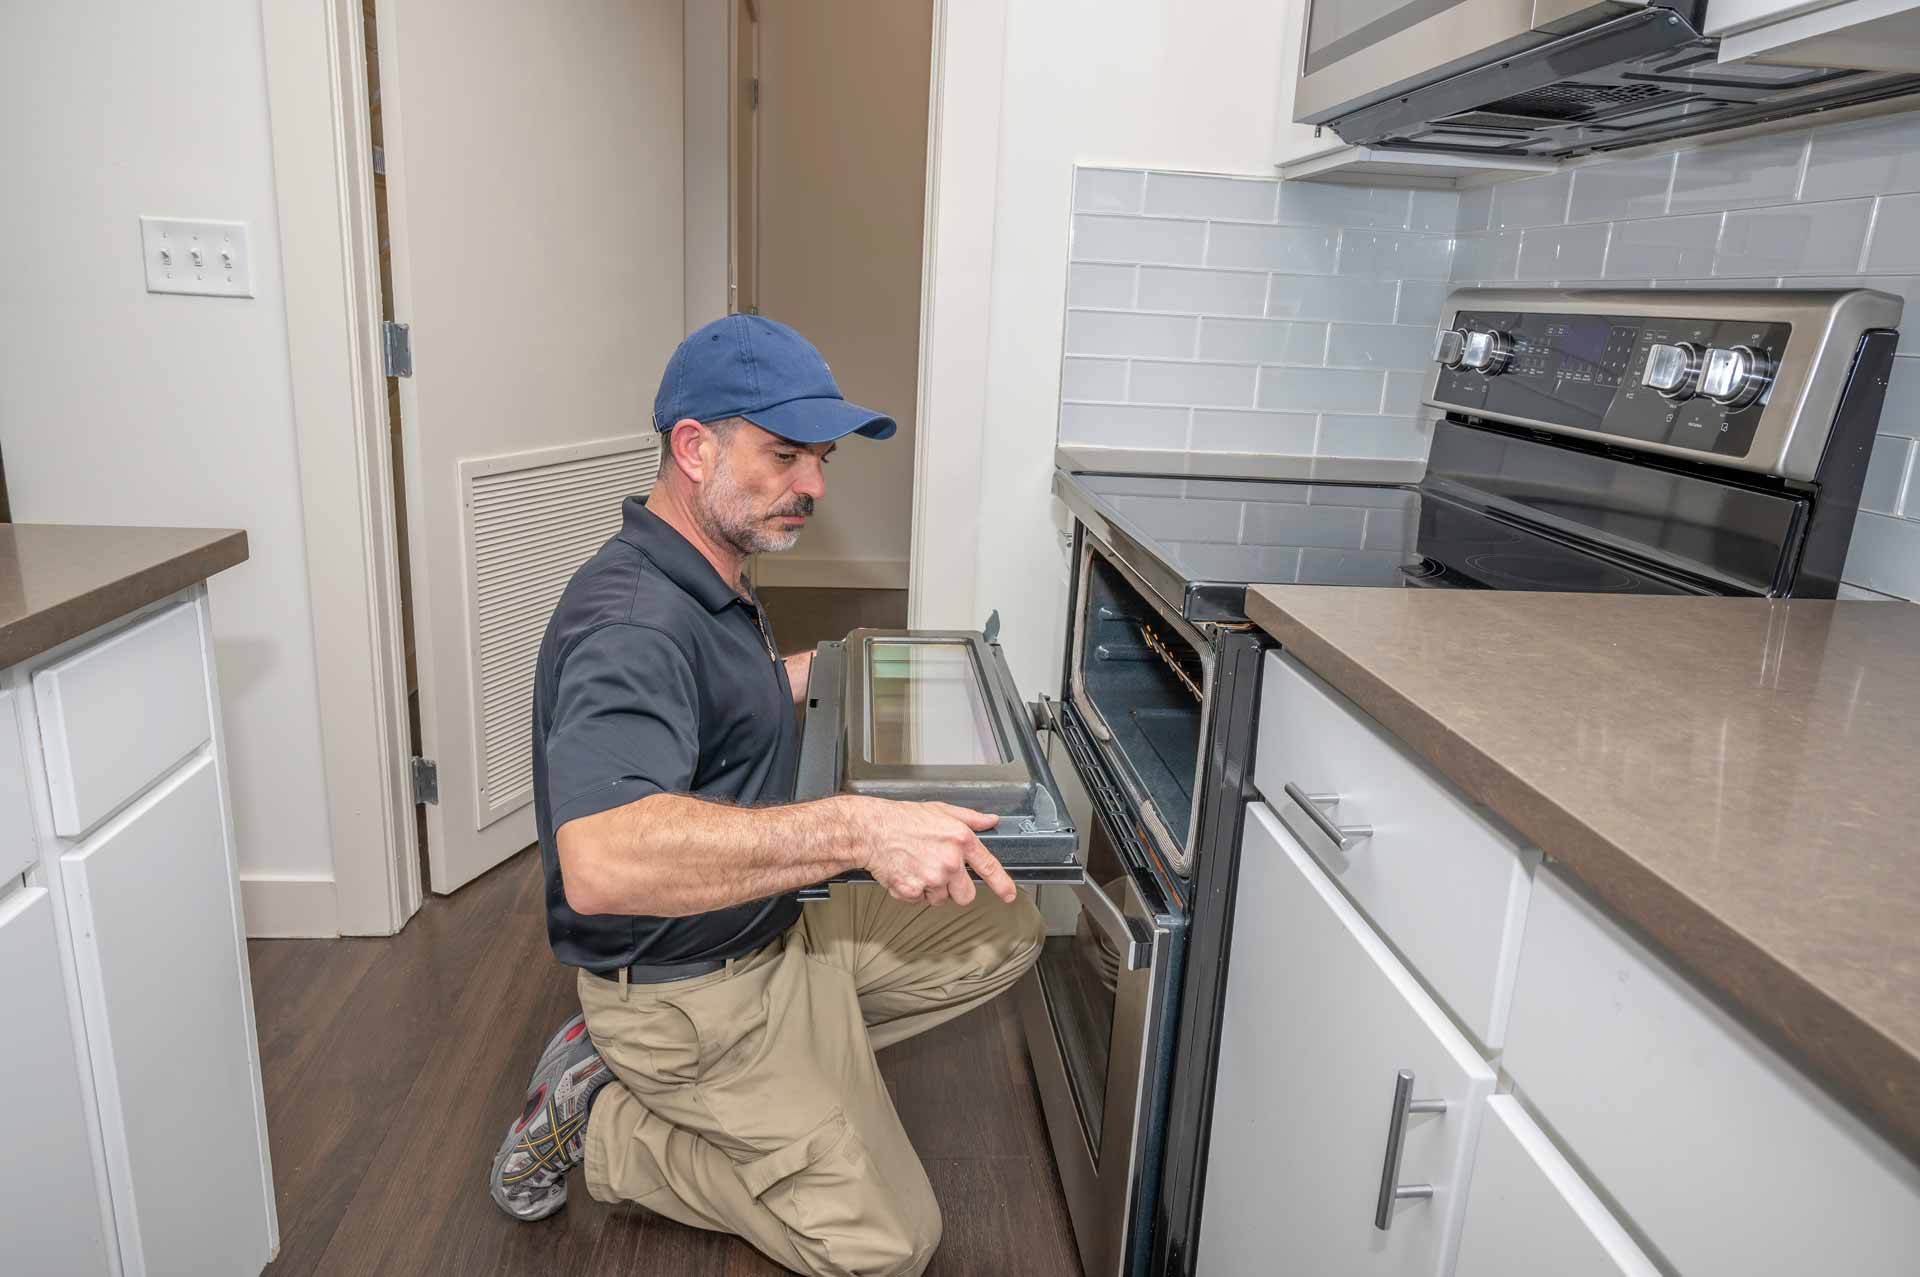 Appliance repair technician removes door from faulty oven to facilitate repair